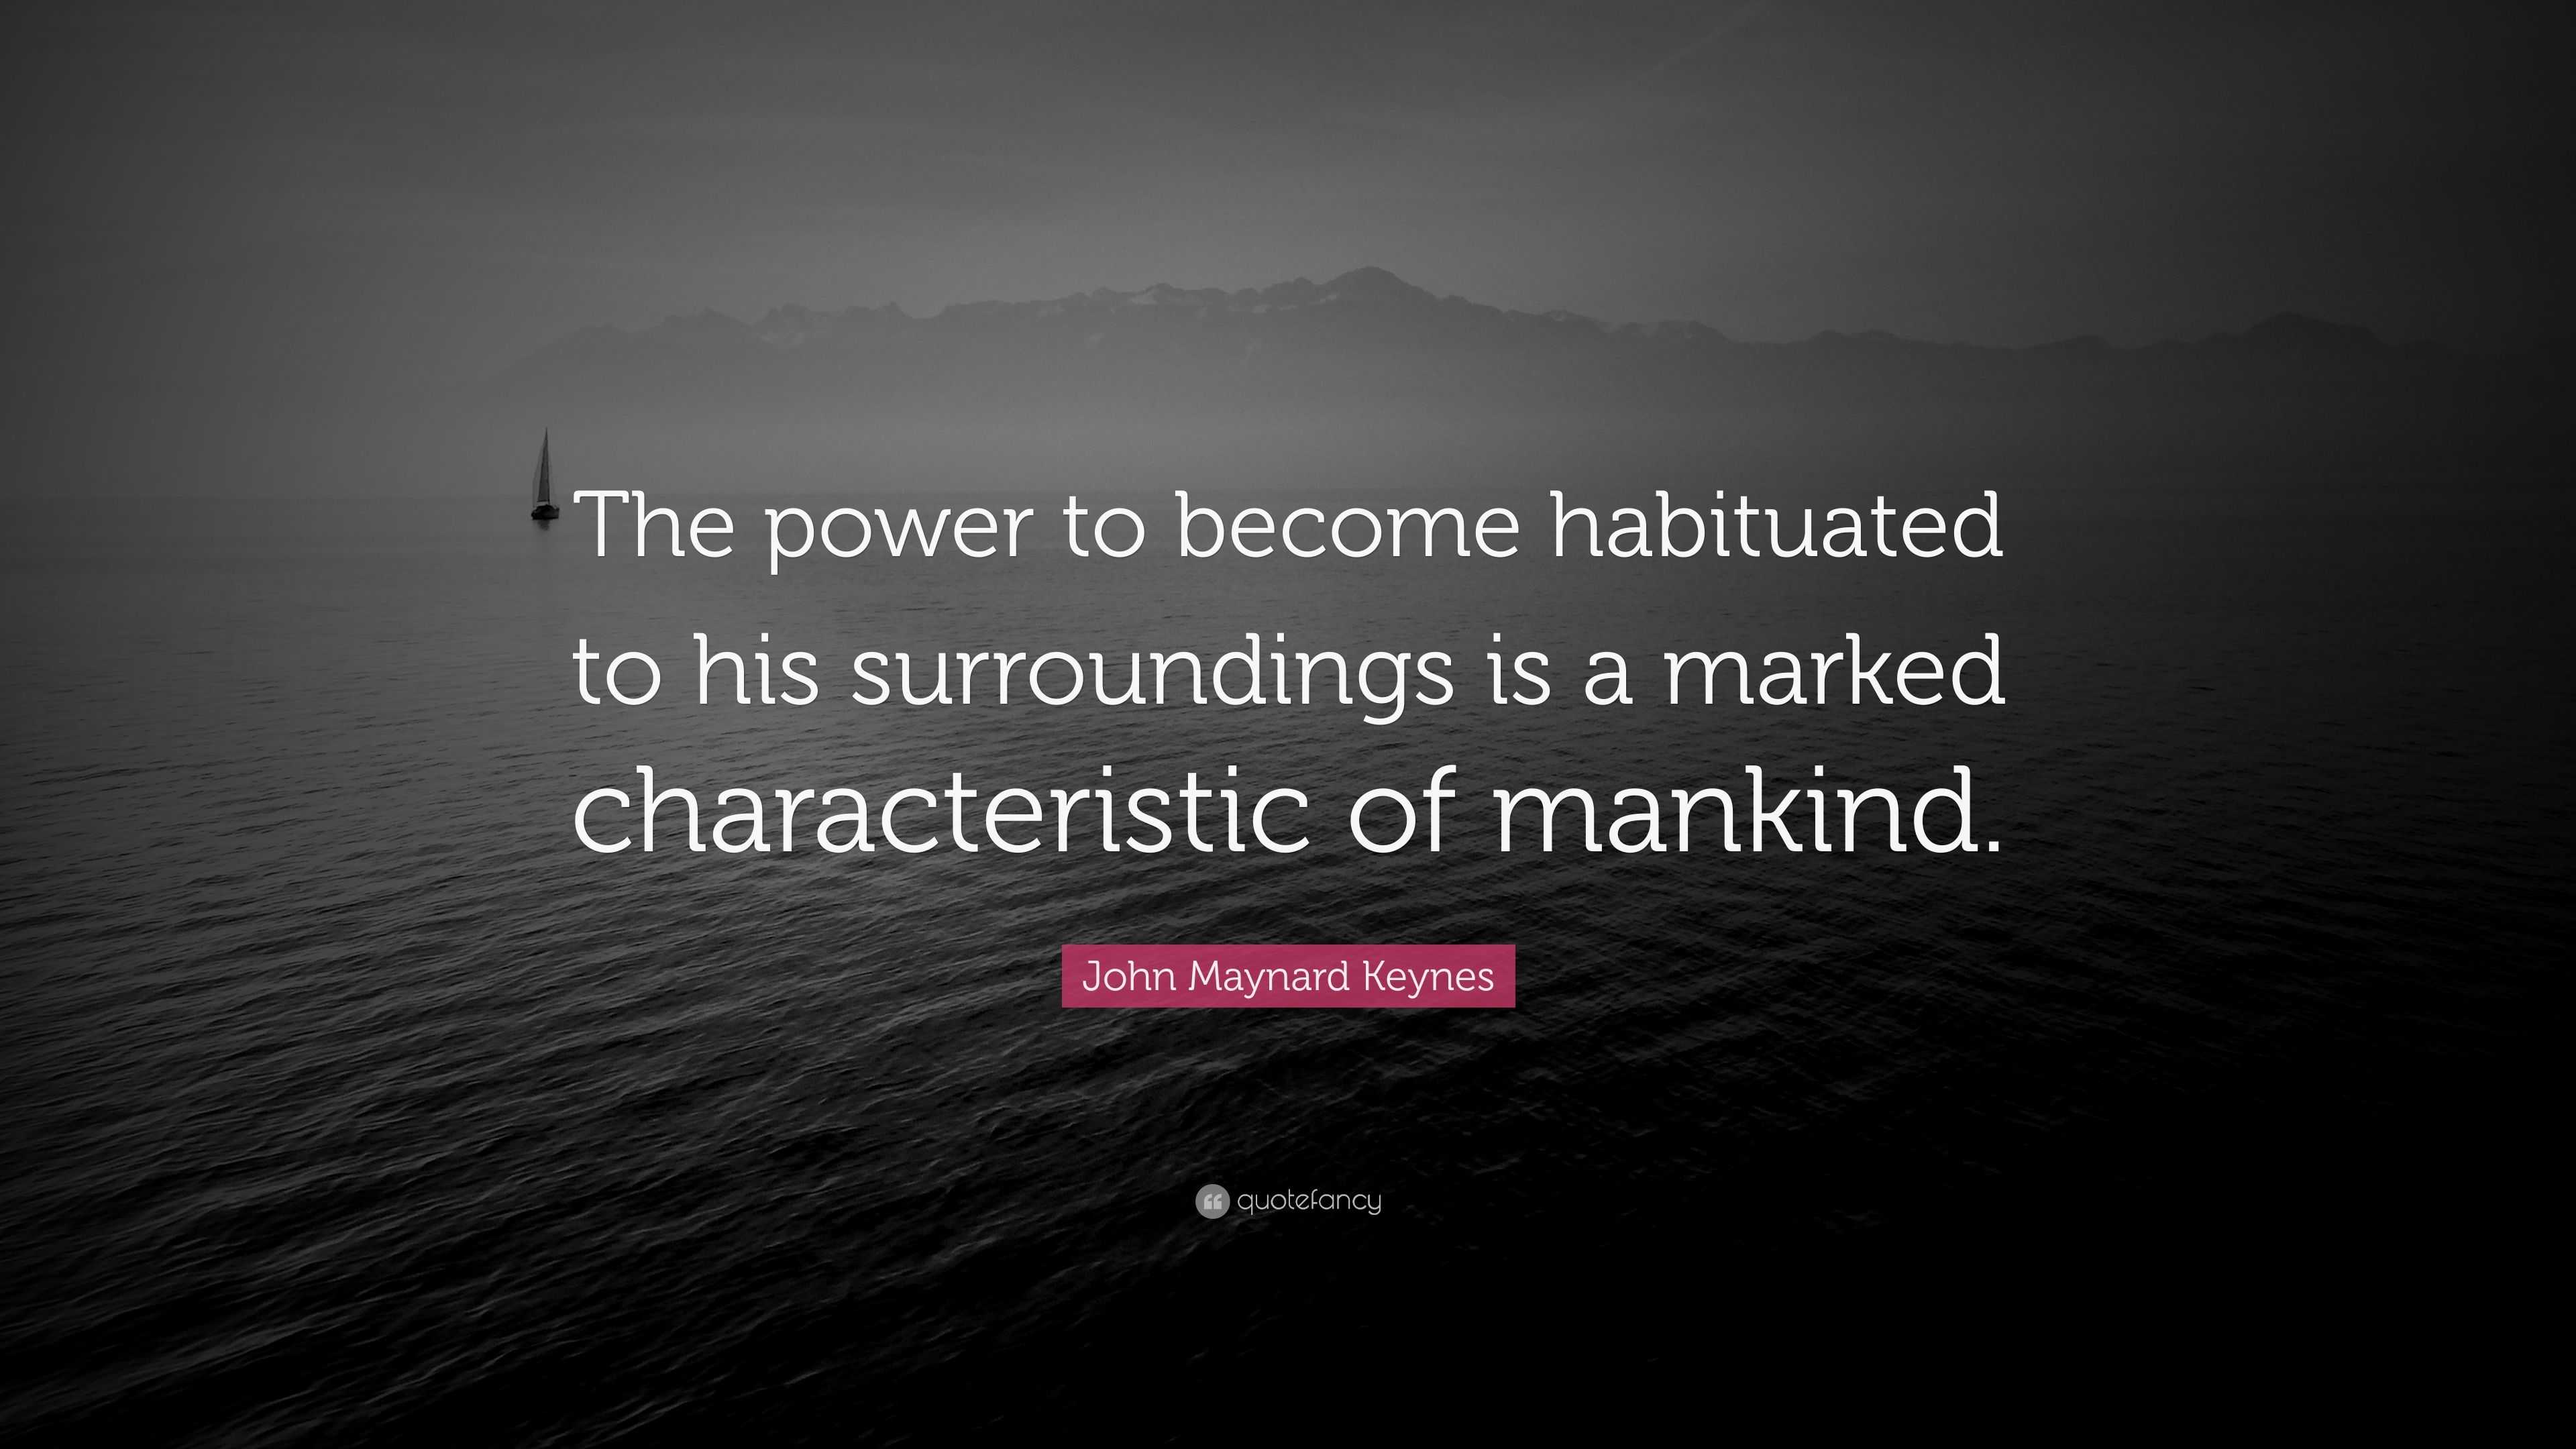 John Maynard Keynes Quote: “The power to become habituated to his ...